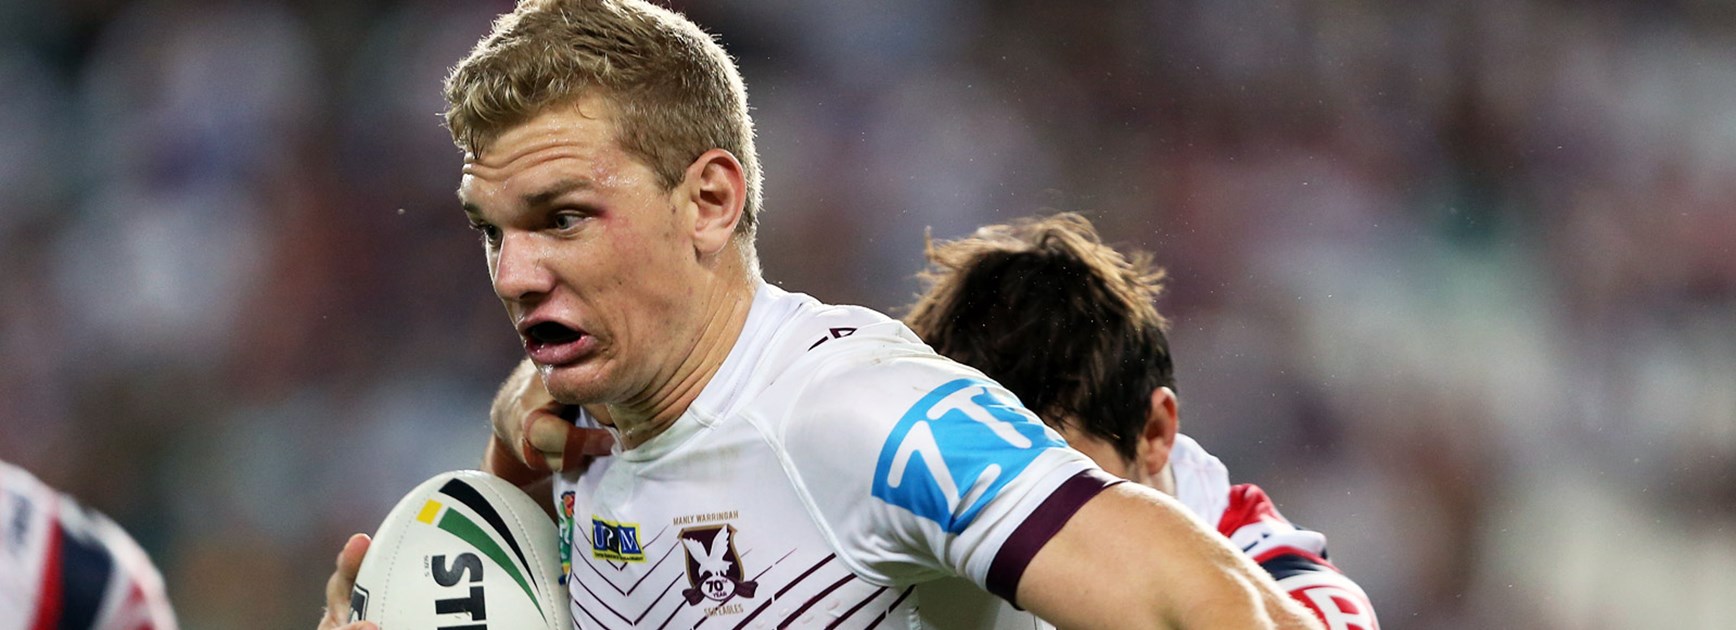 Sea Eagles winger Tom Trbojevic continues to flourish in the NRL.